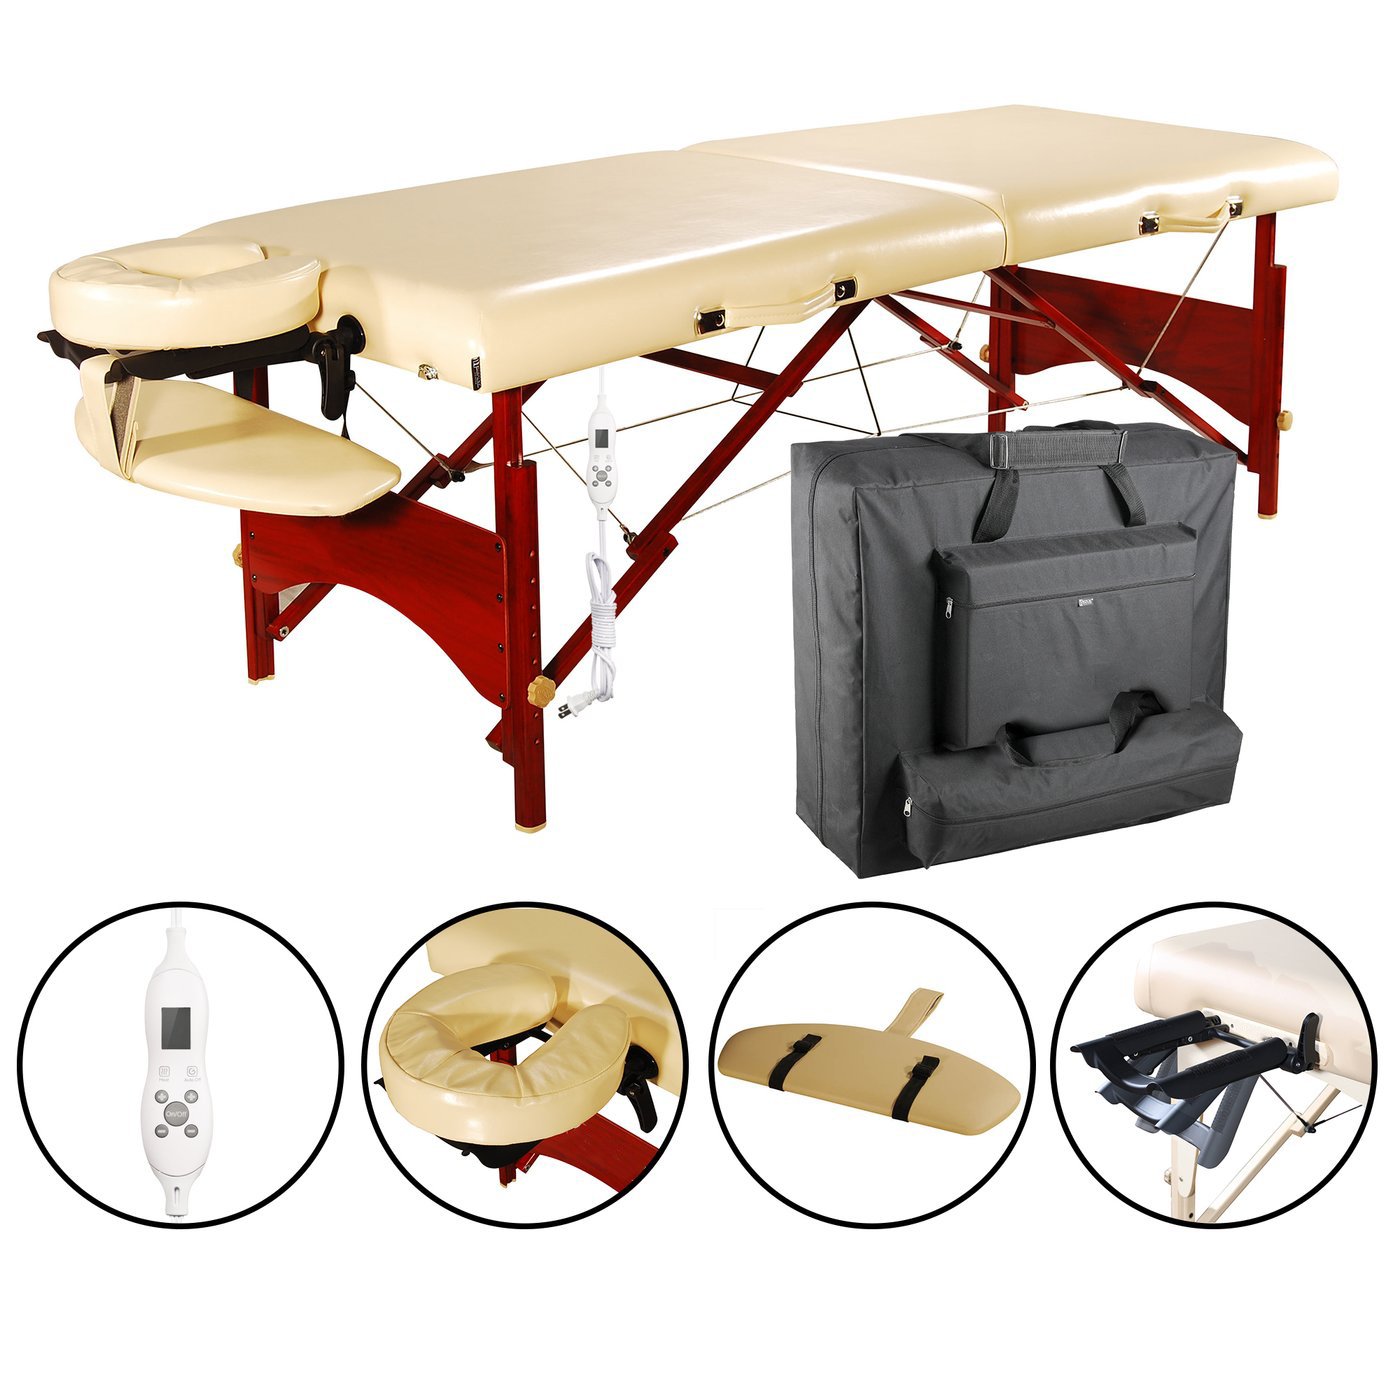 28" Caribbean / Vista ™ Portable Massage Table Package with Memory Foam, Regulation Size & Easy to Move Around! Cream Color